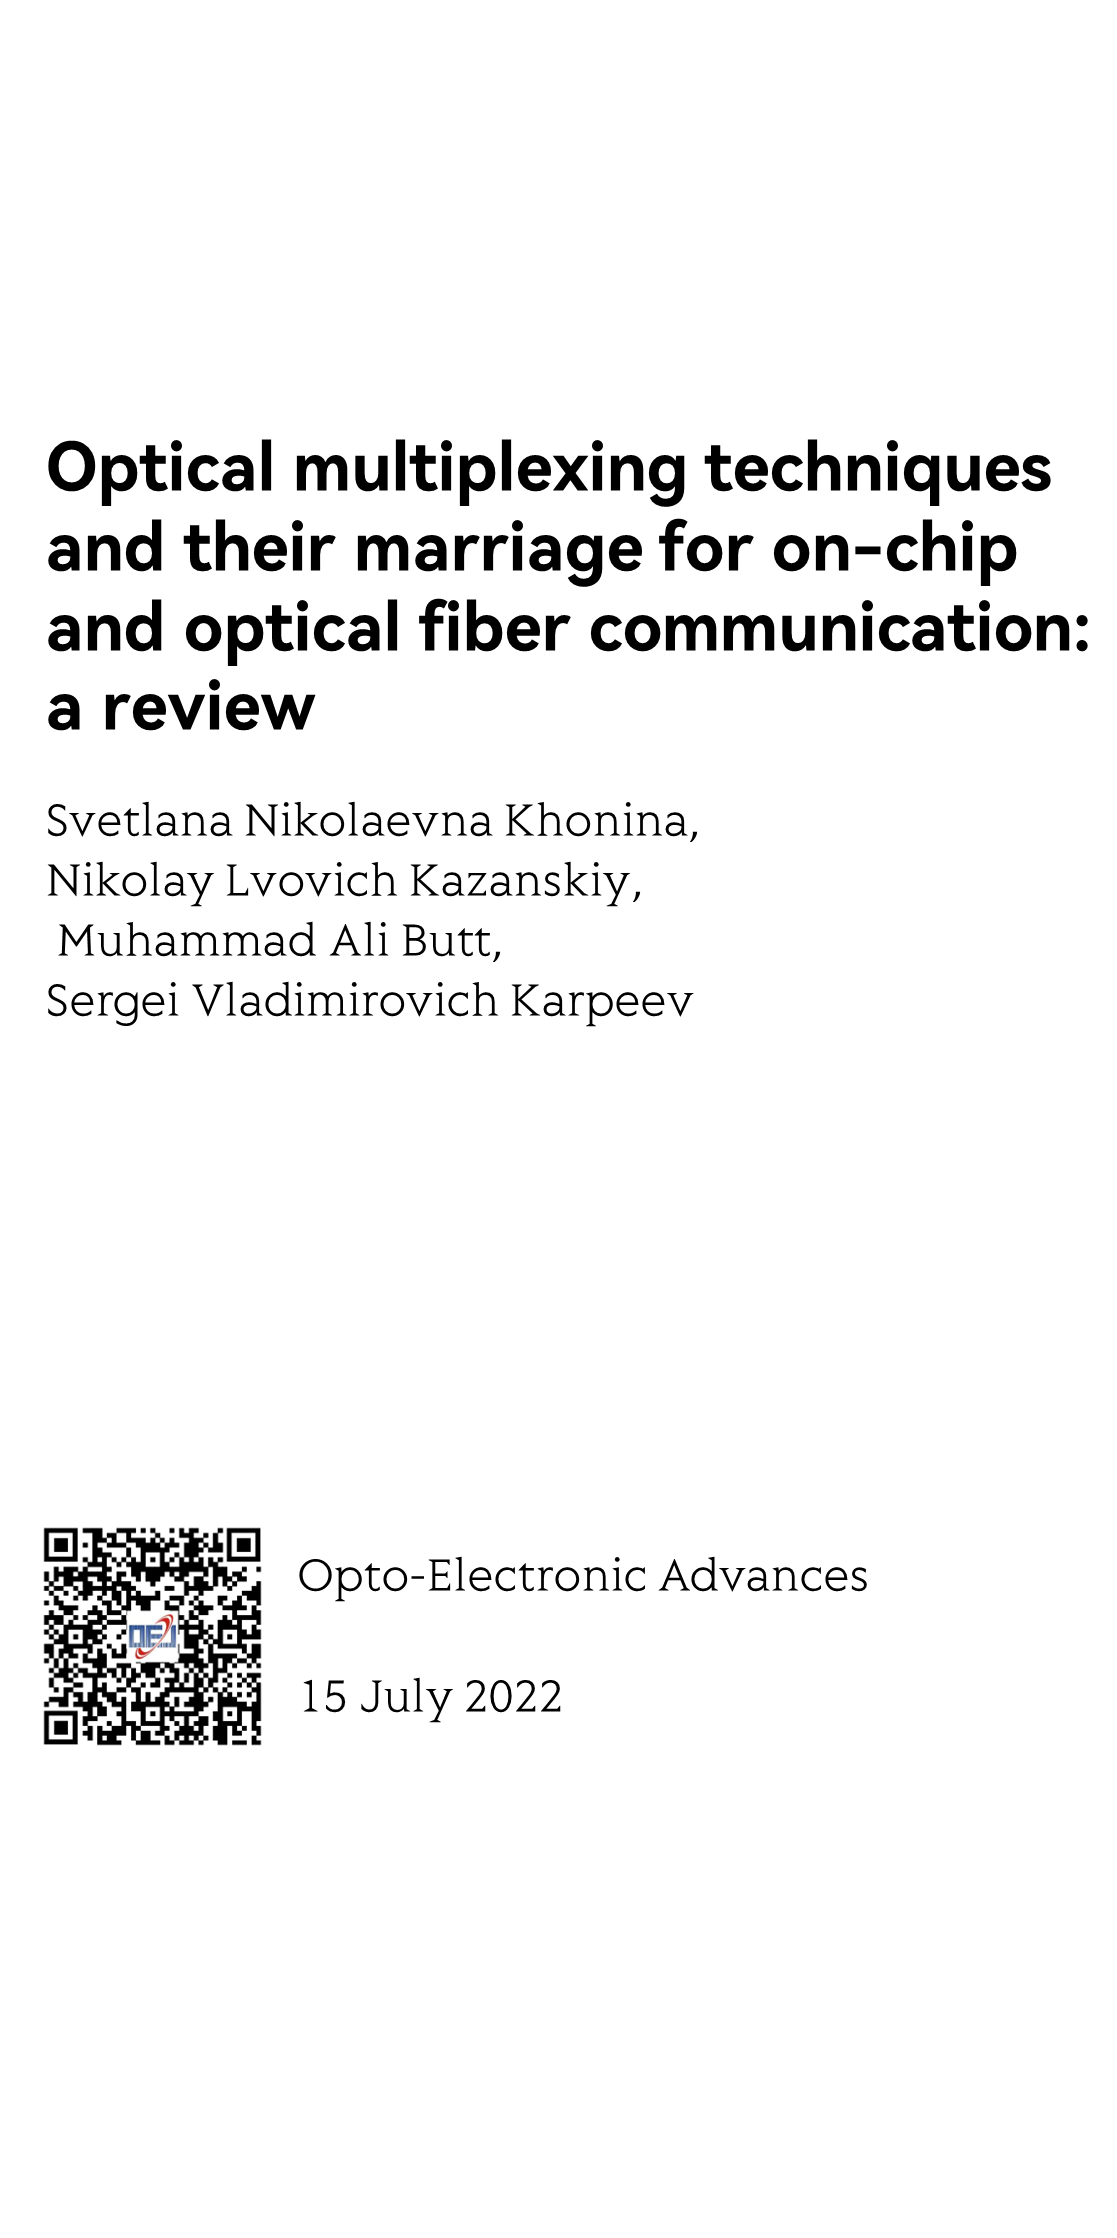 Optical multiplexing techniques and their marriage for on-chip and optical fiber communication: a review_1